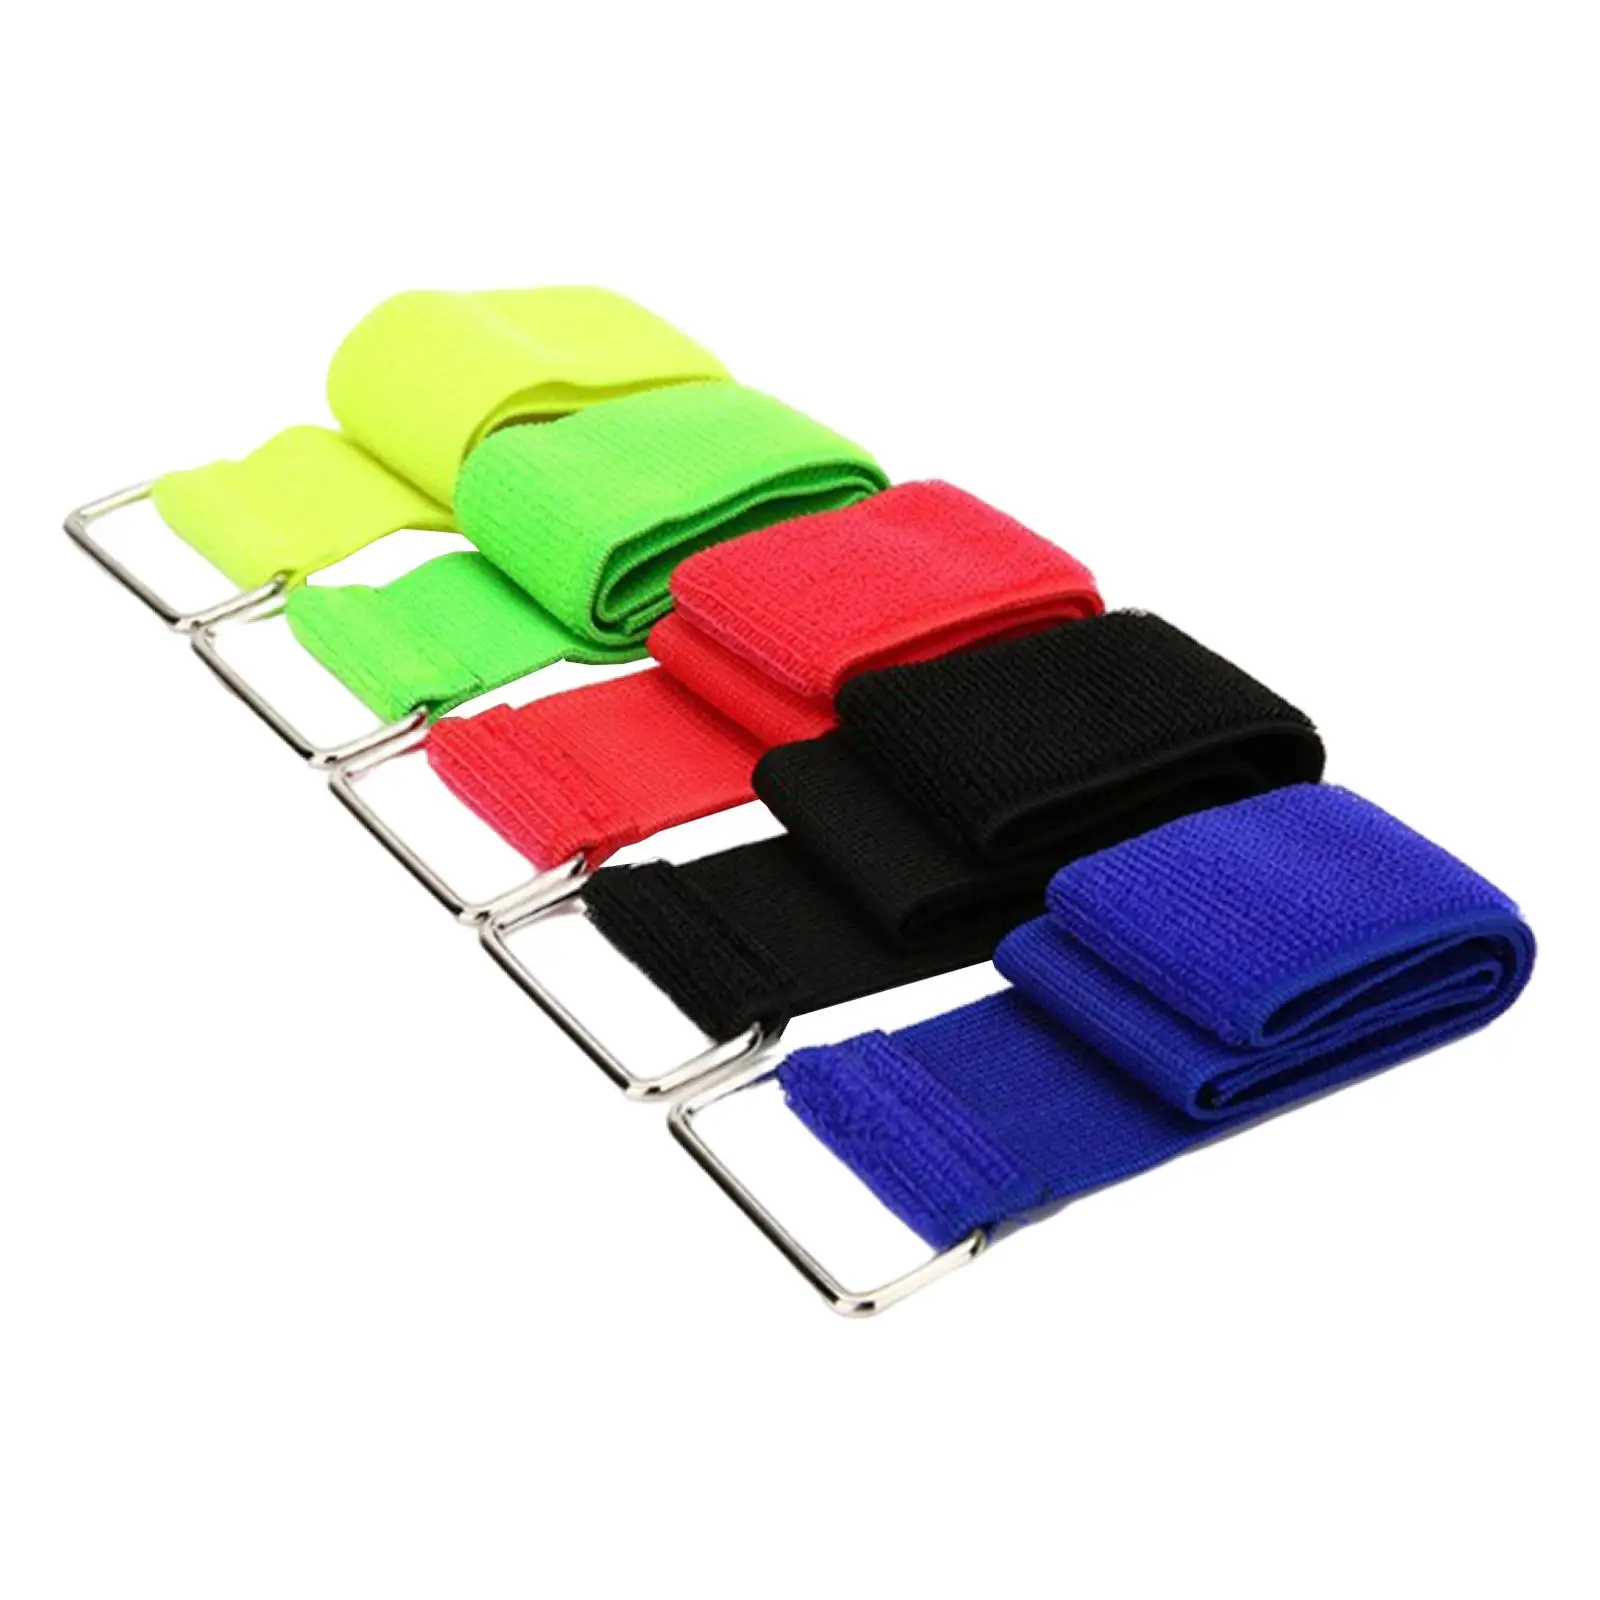 5x Firm Relay Race Game Bands Carnival Relay Race Game Exercise Teamwork Skills Race Bands Christmas Game for Adult Family